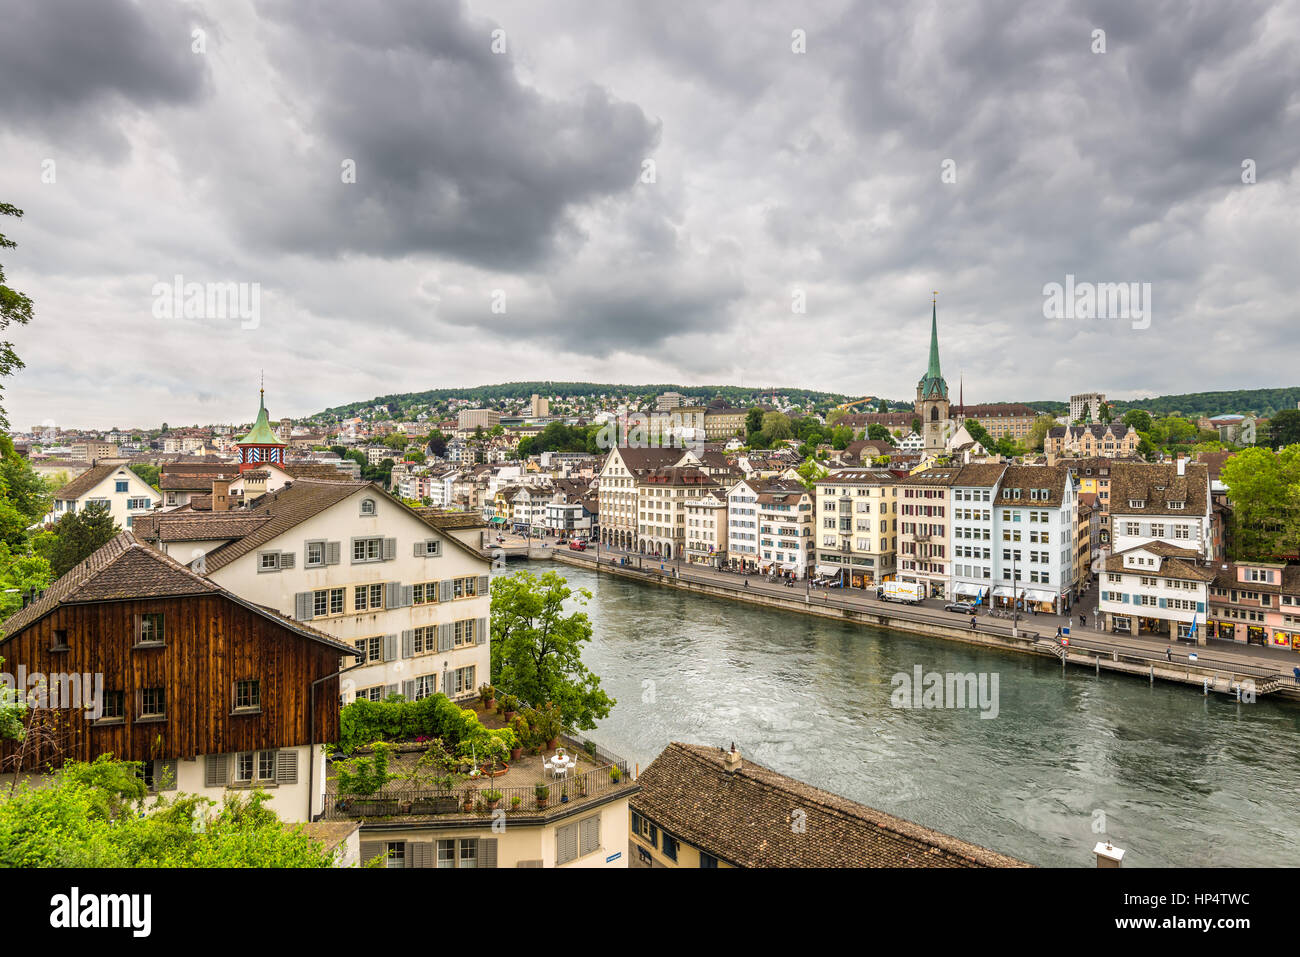 Zurich, Switzerland - May 24, 2016: Architecture of Zurich. Aerial view of Zurich old town and River Limmat from Lindenhof in Zurich on a cloudy day,  Stock Photo